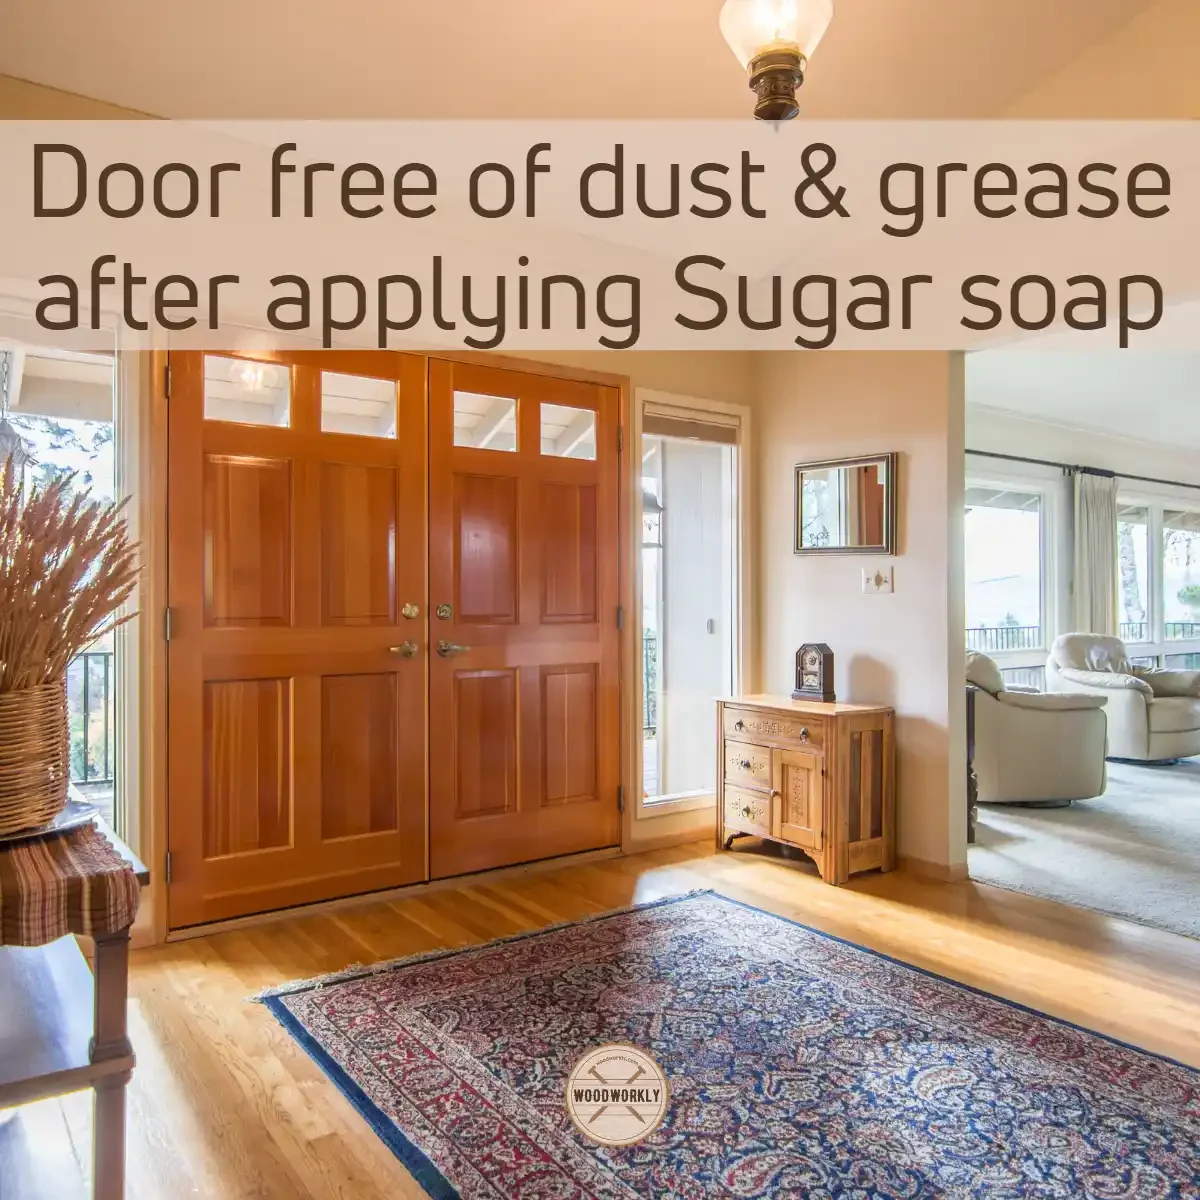 Door free of dust & grease after applying Sugar soap